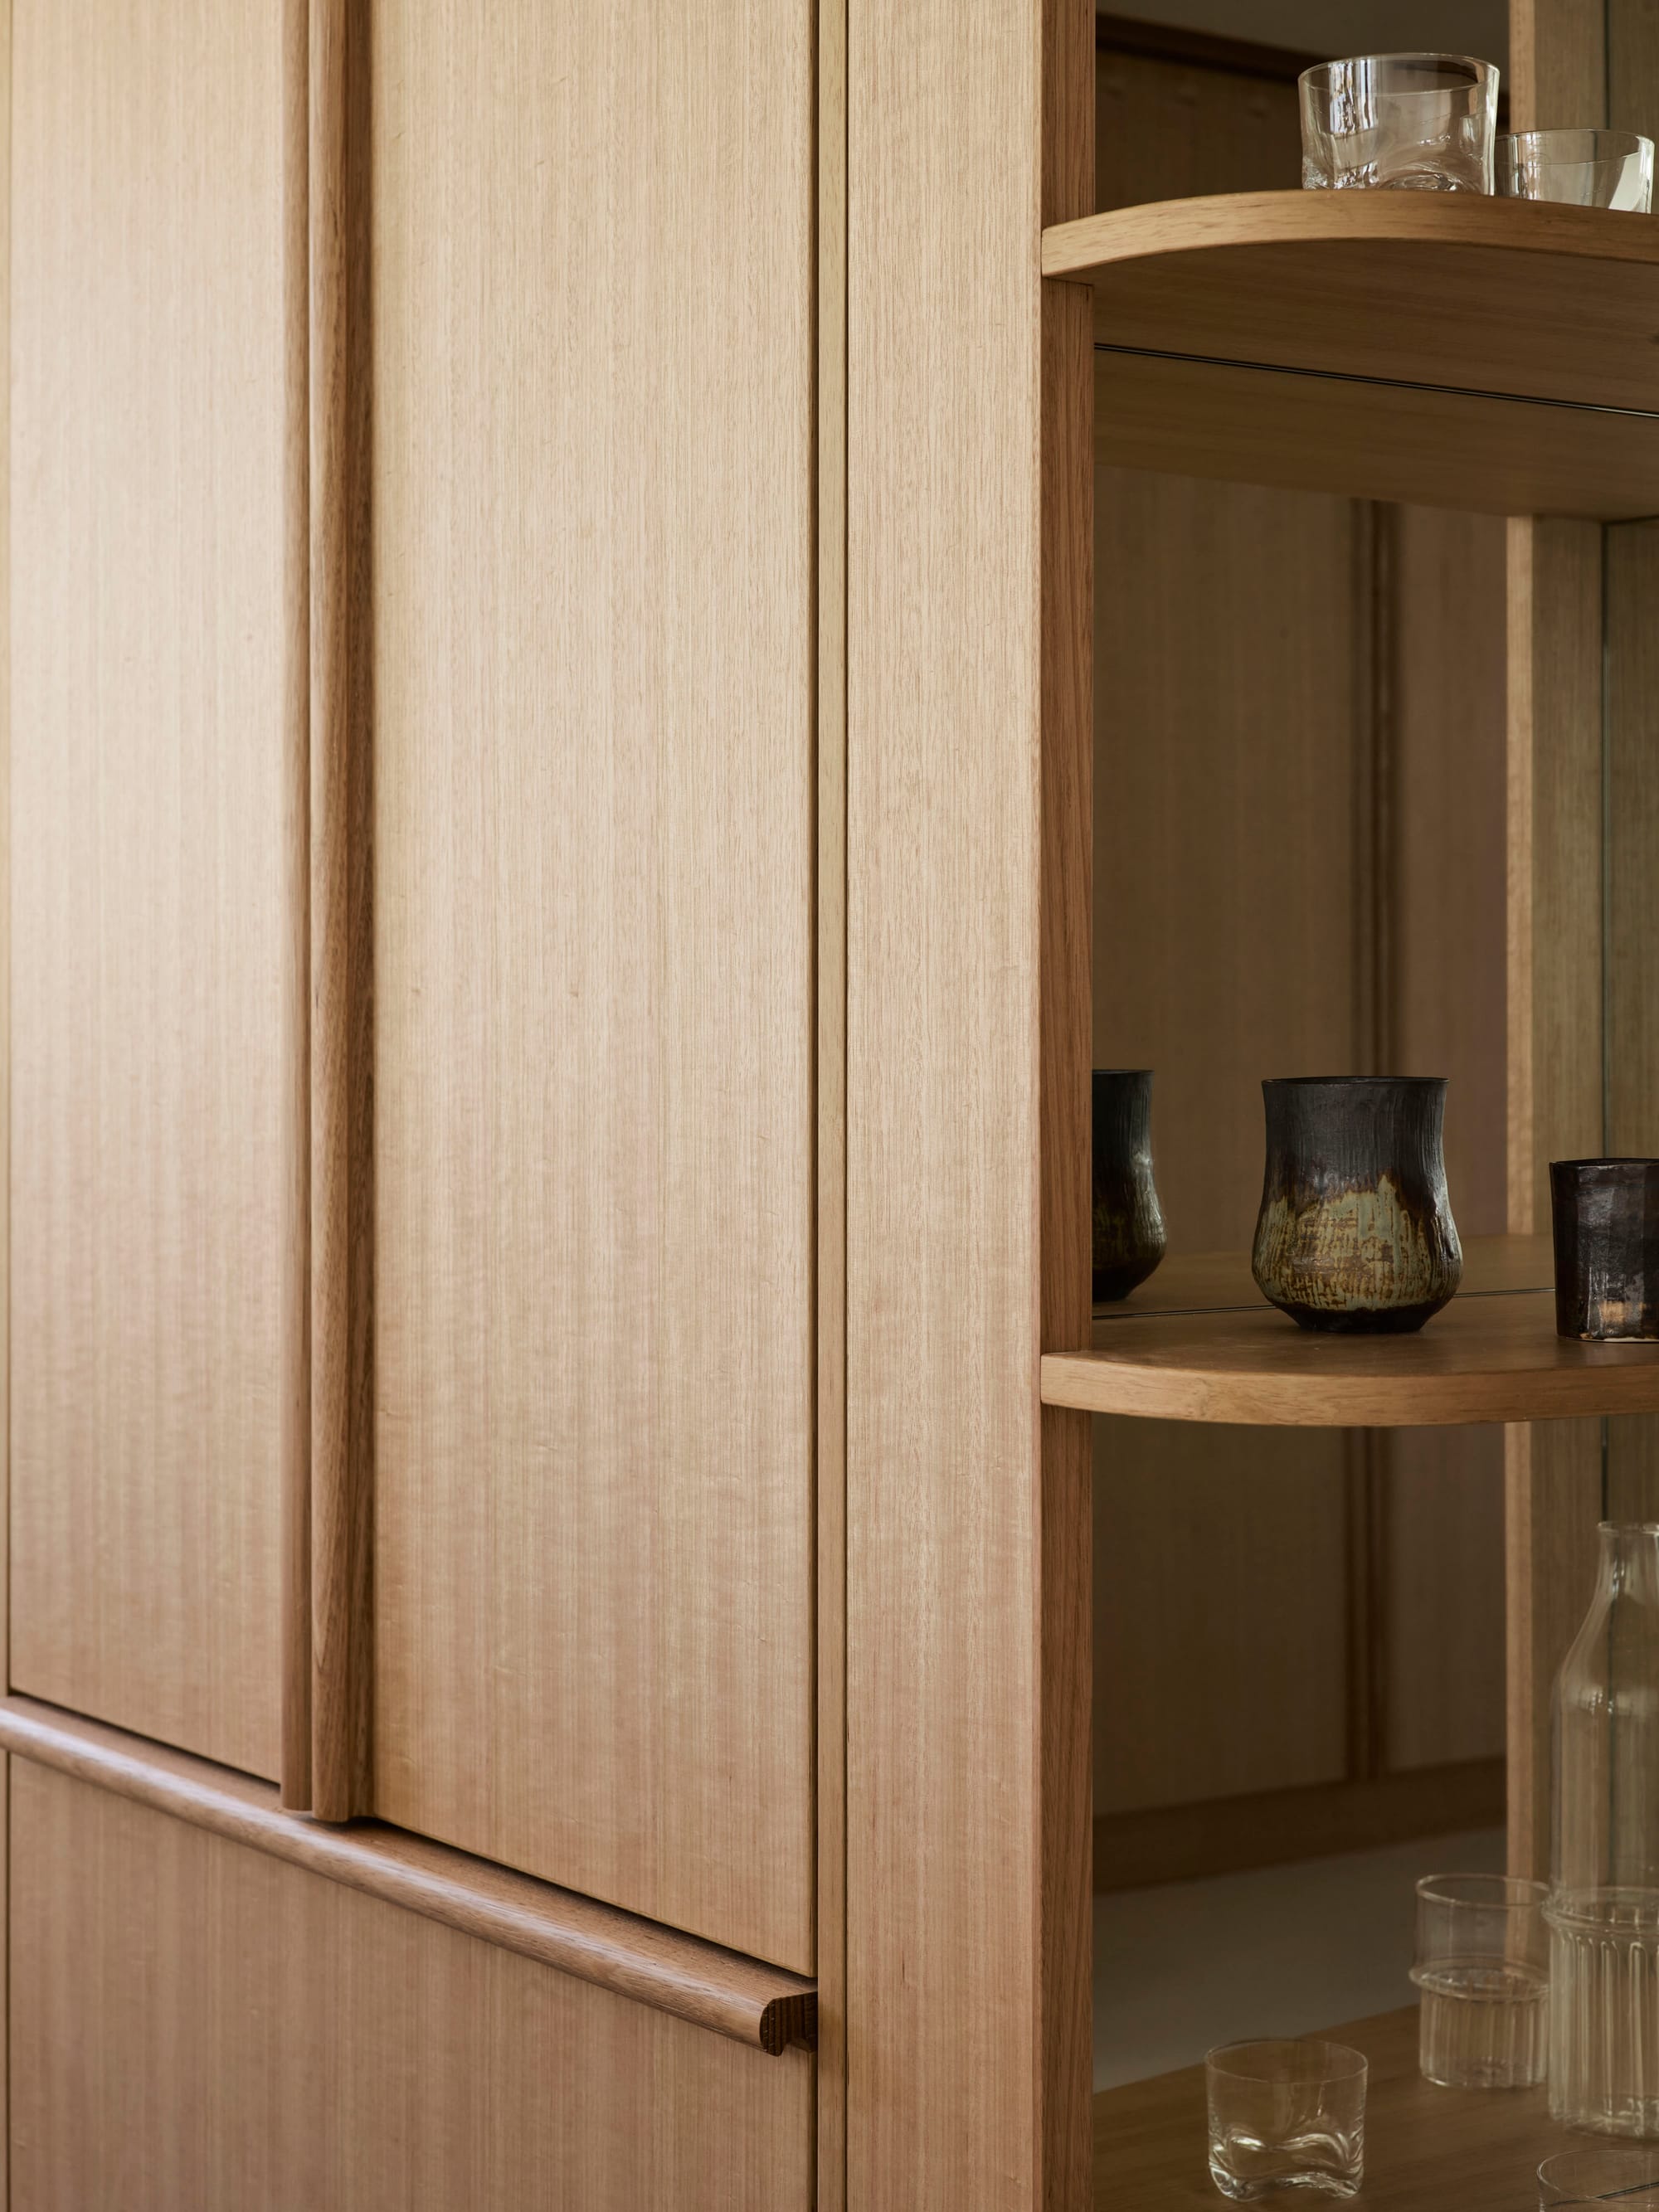 A detail shot of the Tasmanian timber veneer joinery in this modern apartment design by Studio ZAWA